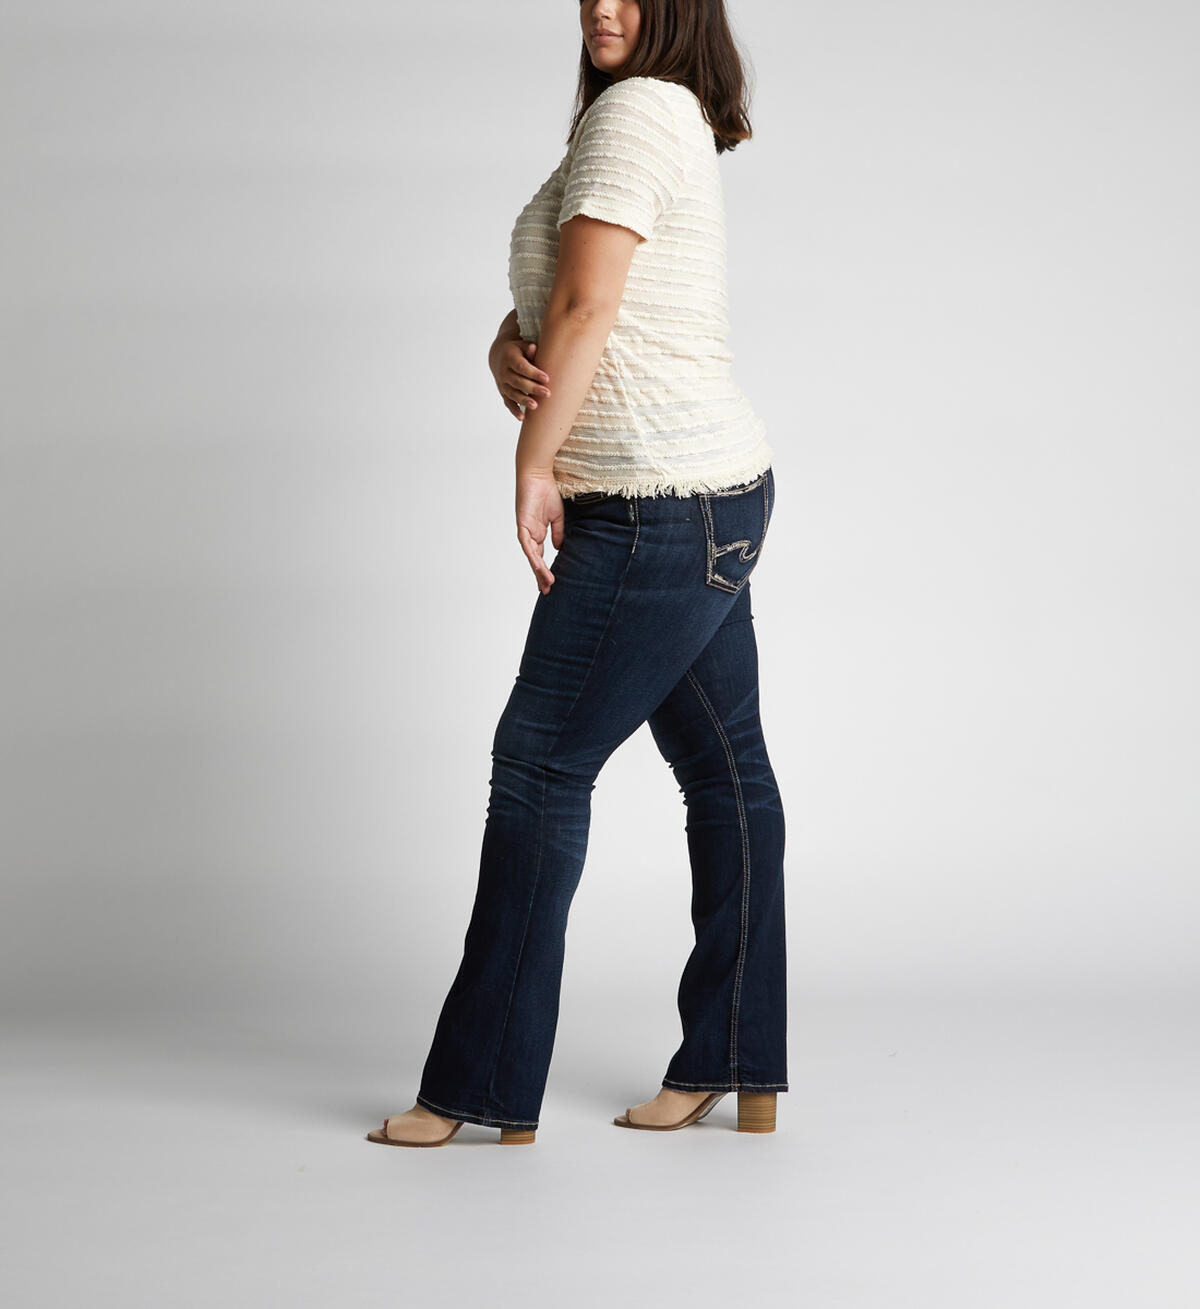 Elyse Mid-Rise Curvy Relaxed Slim Bootcut Jeans, , hi-res image number 2